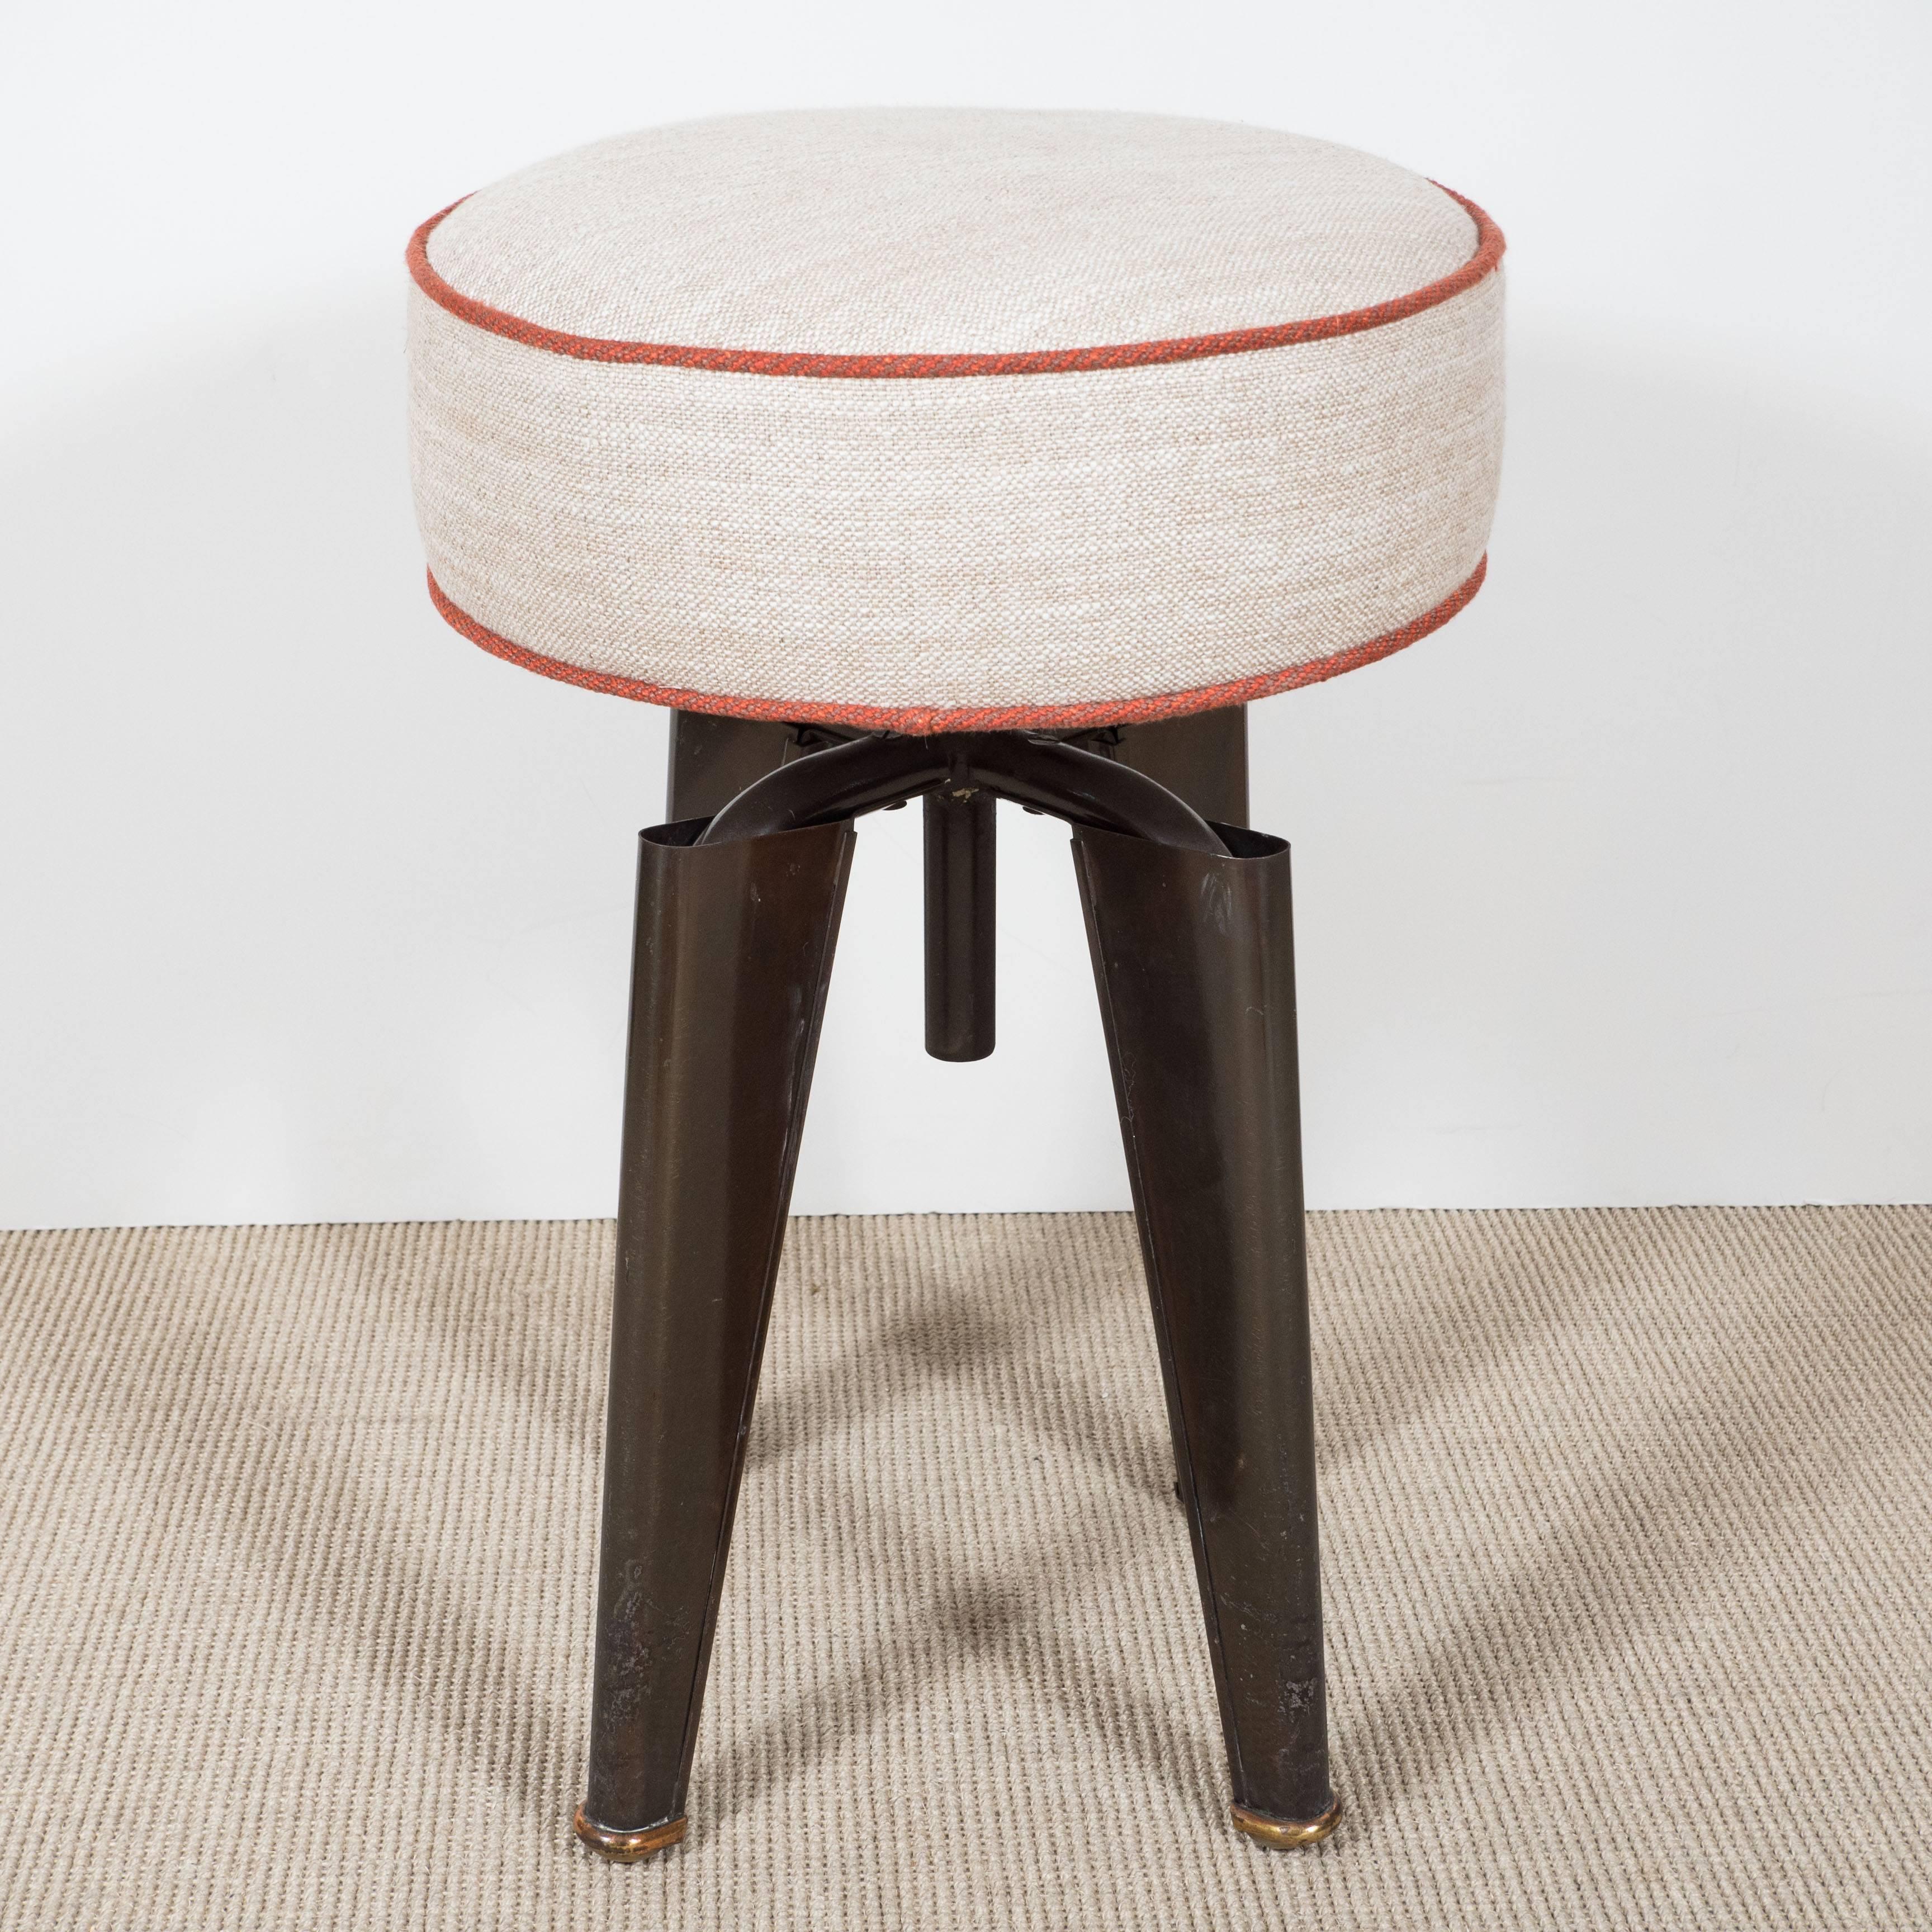 Andre Domin Marcel Geneviere Maison Domin stool round with metal base and gold feet.